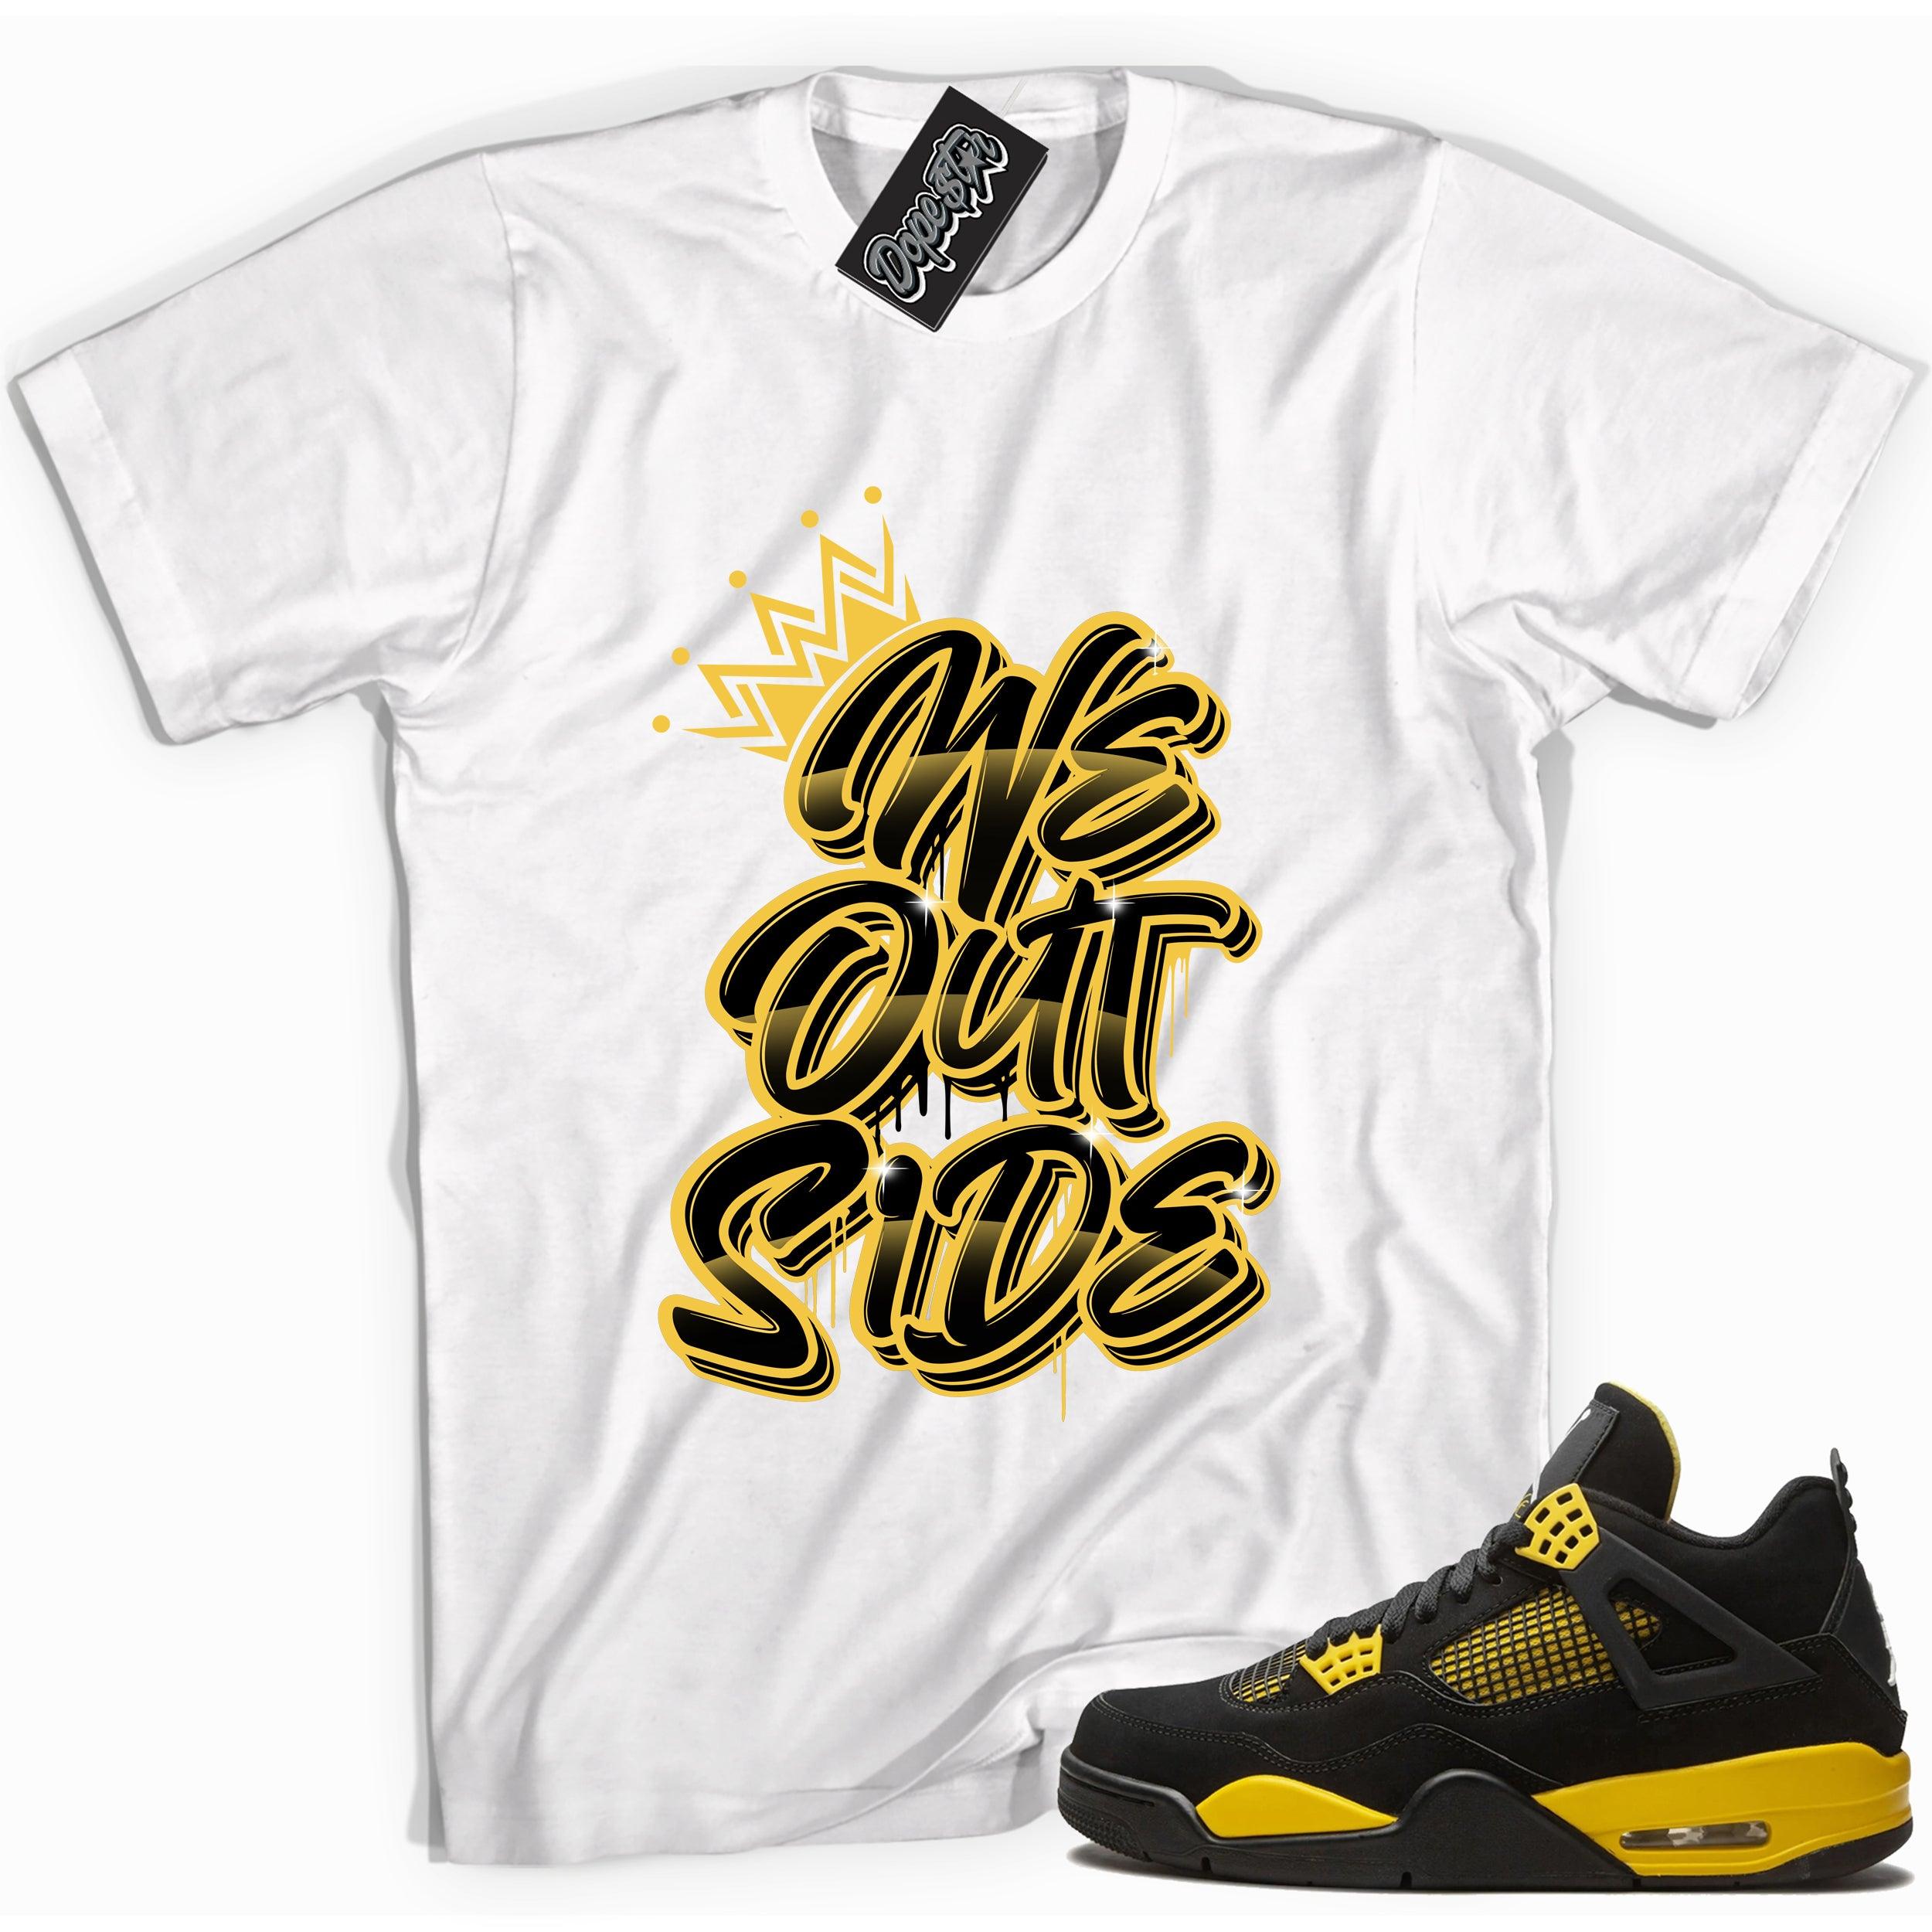 Cool white graphic tee with 'we outside' print, that perfectly matches Air Jordan 4 Thunder sneakers